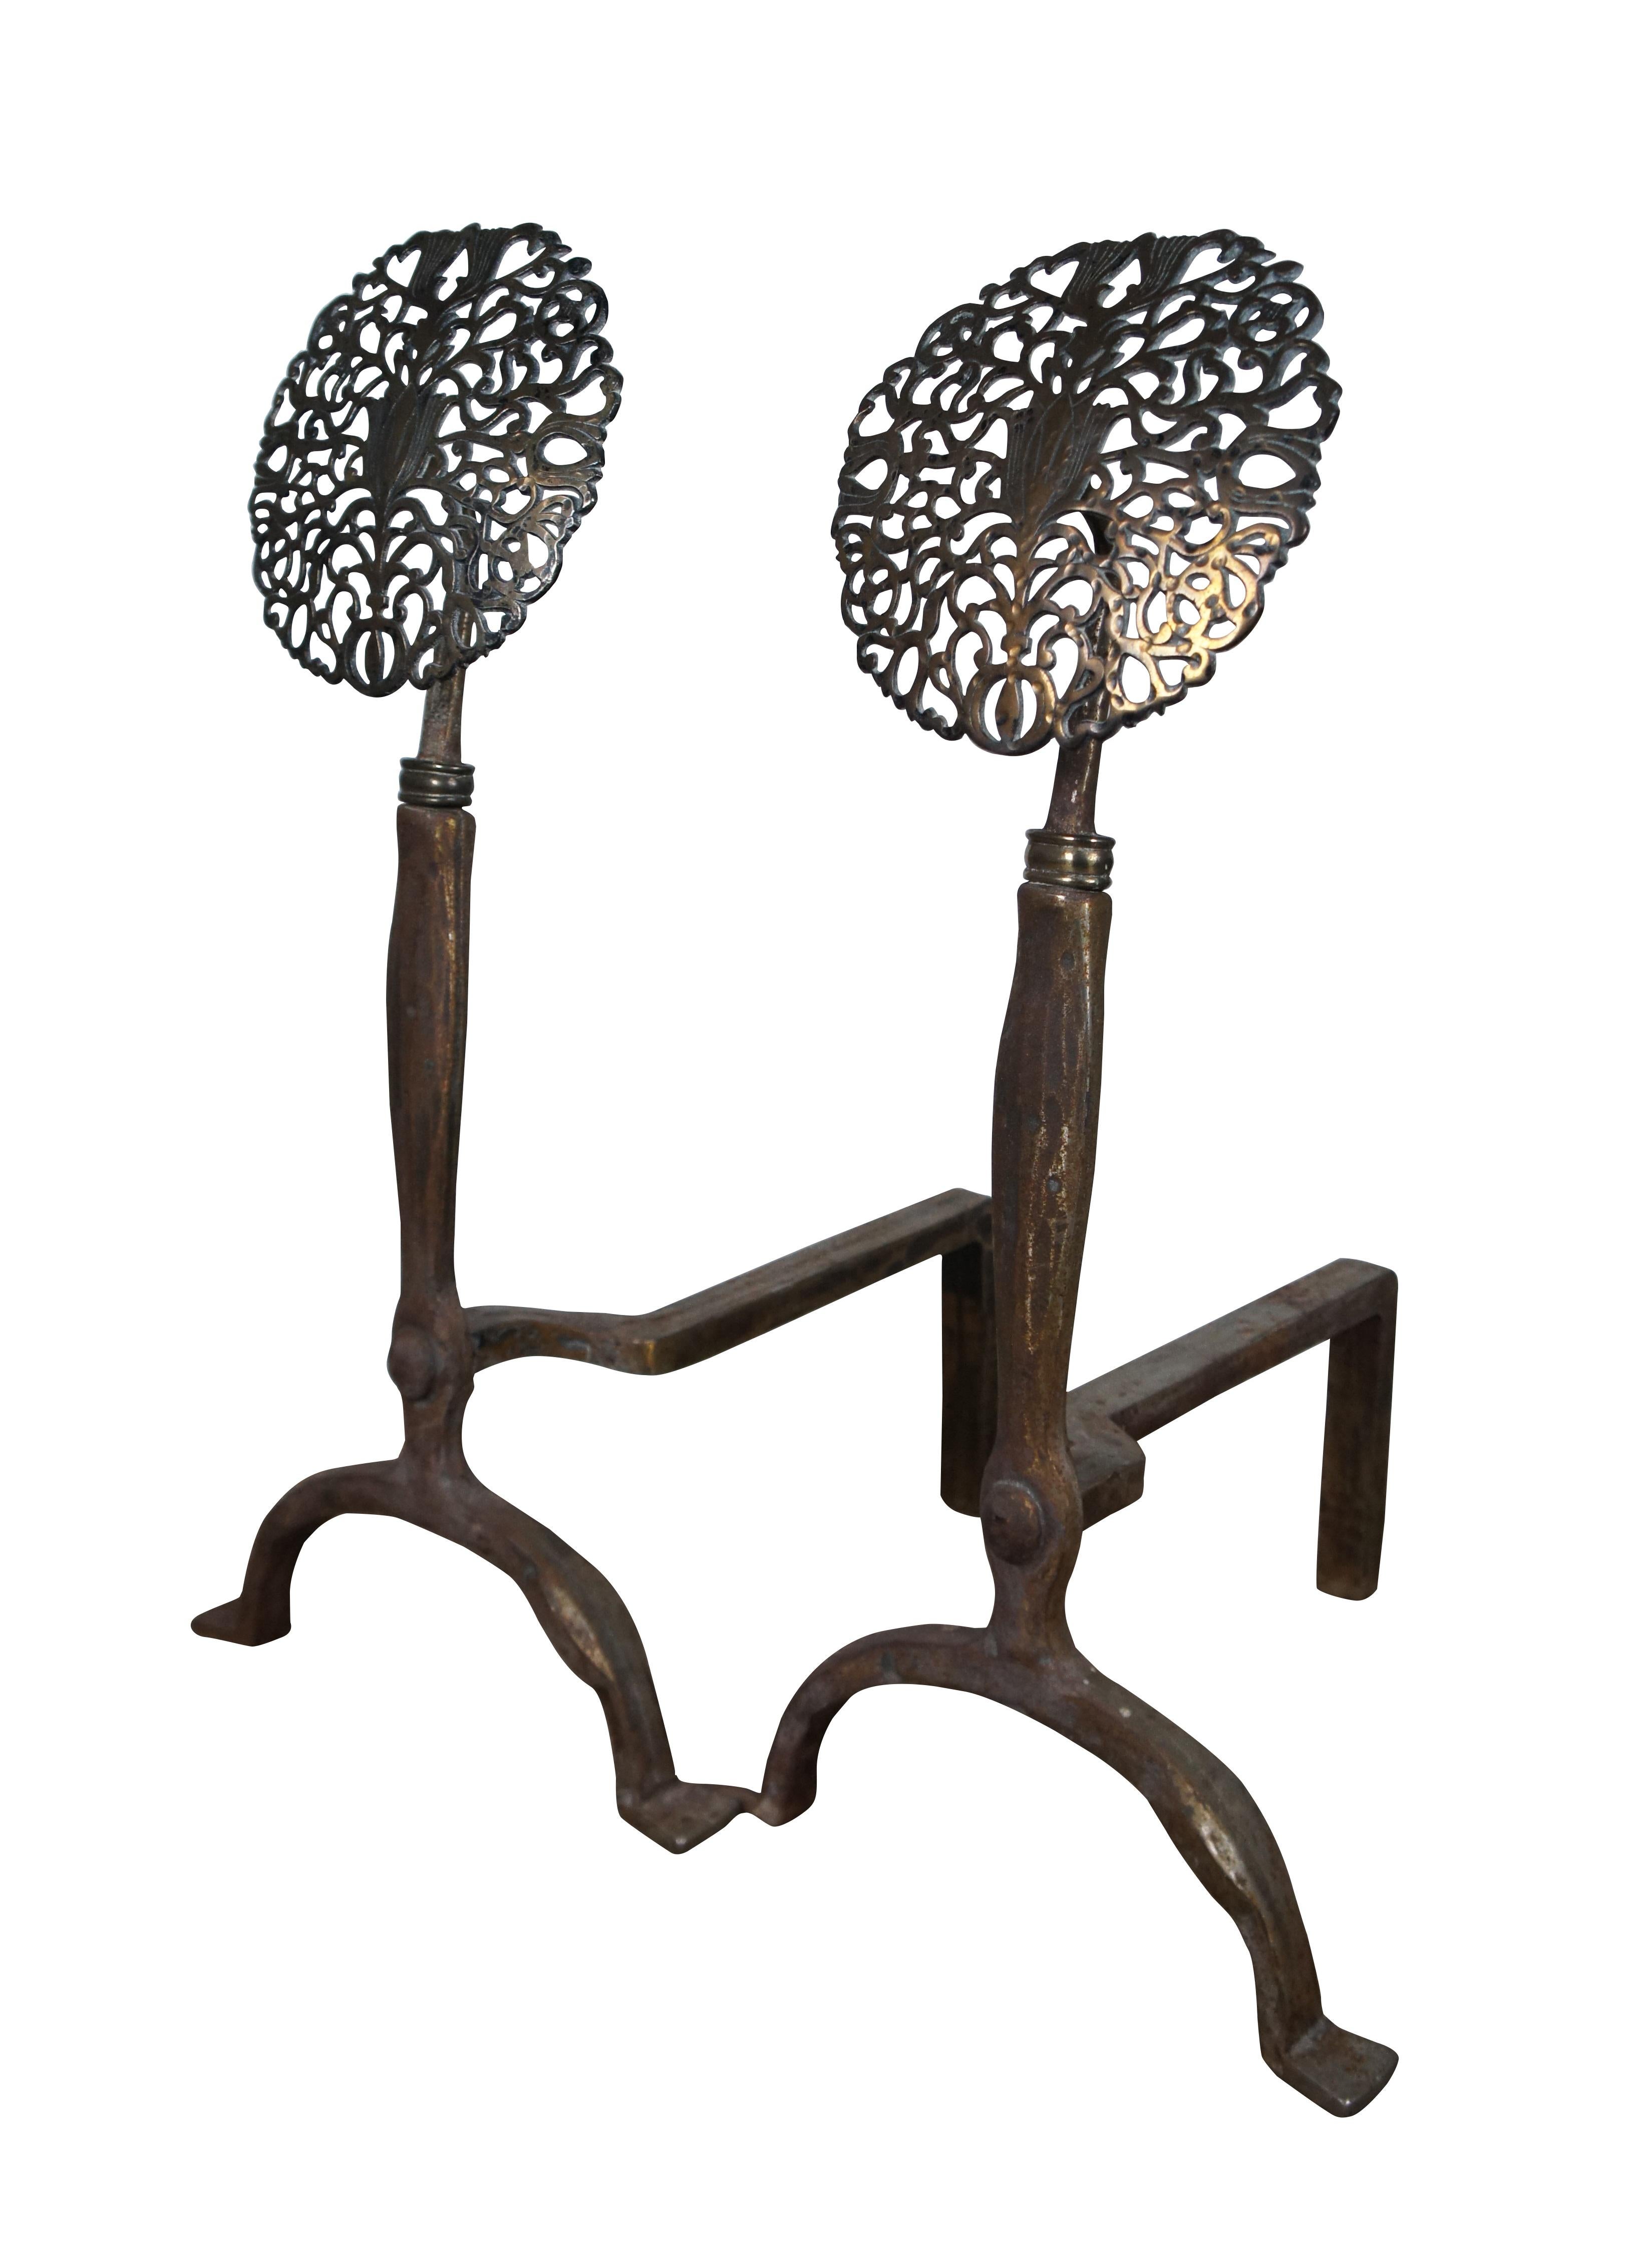 Antique Art Deco J Loth Stoves Virginia Metalcrafters arts and crafts style andirons / firedogs featuring bow legged iron bases topped with a pierced floral filigree medallion. Marked with number 100 on base. 

Dimensions:
13.25